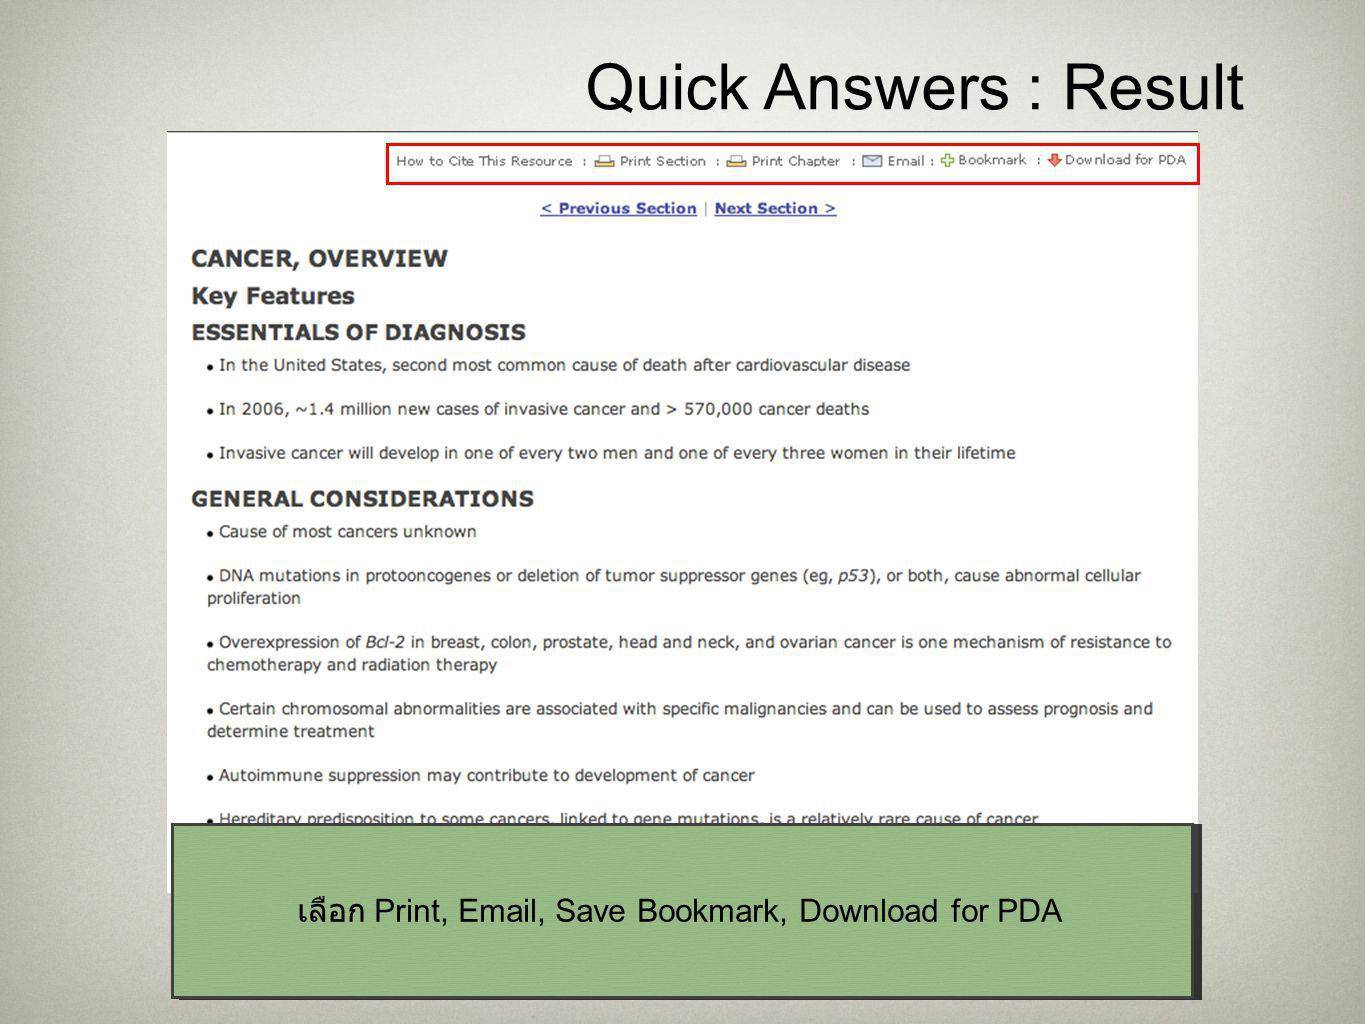 20 Quick Answers : Result เลือก Print,  , Save Bookmark, Download for PDA